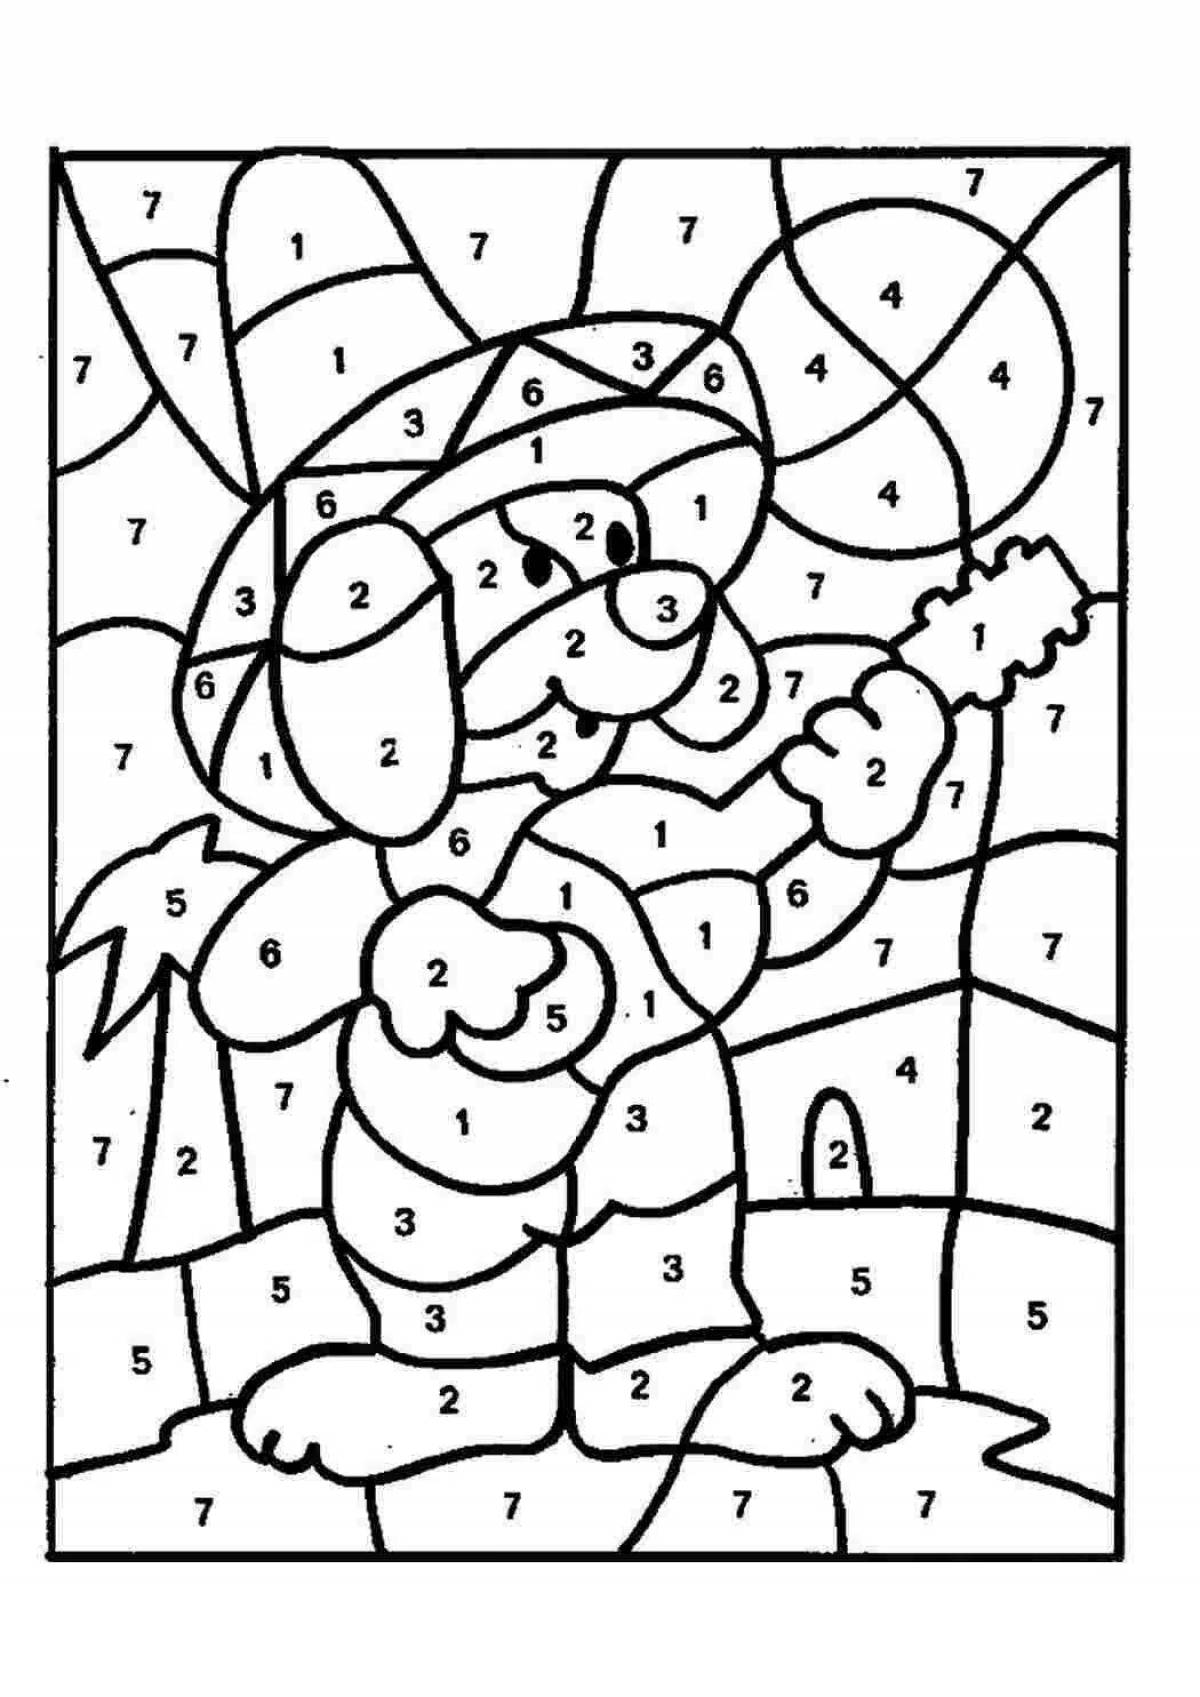 Coloring pages for 7th grade kids